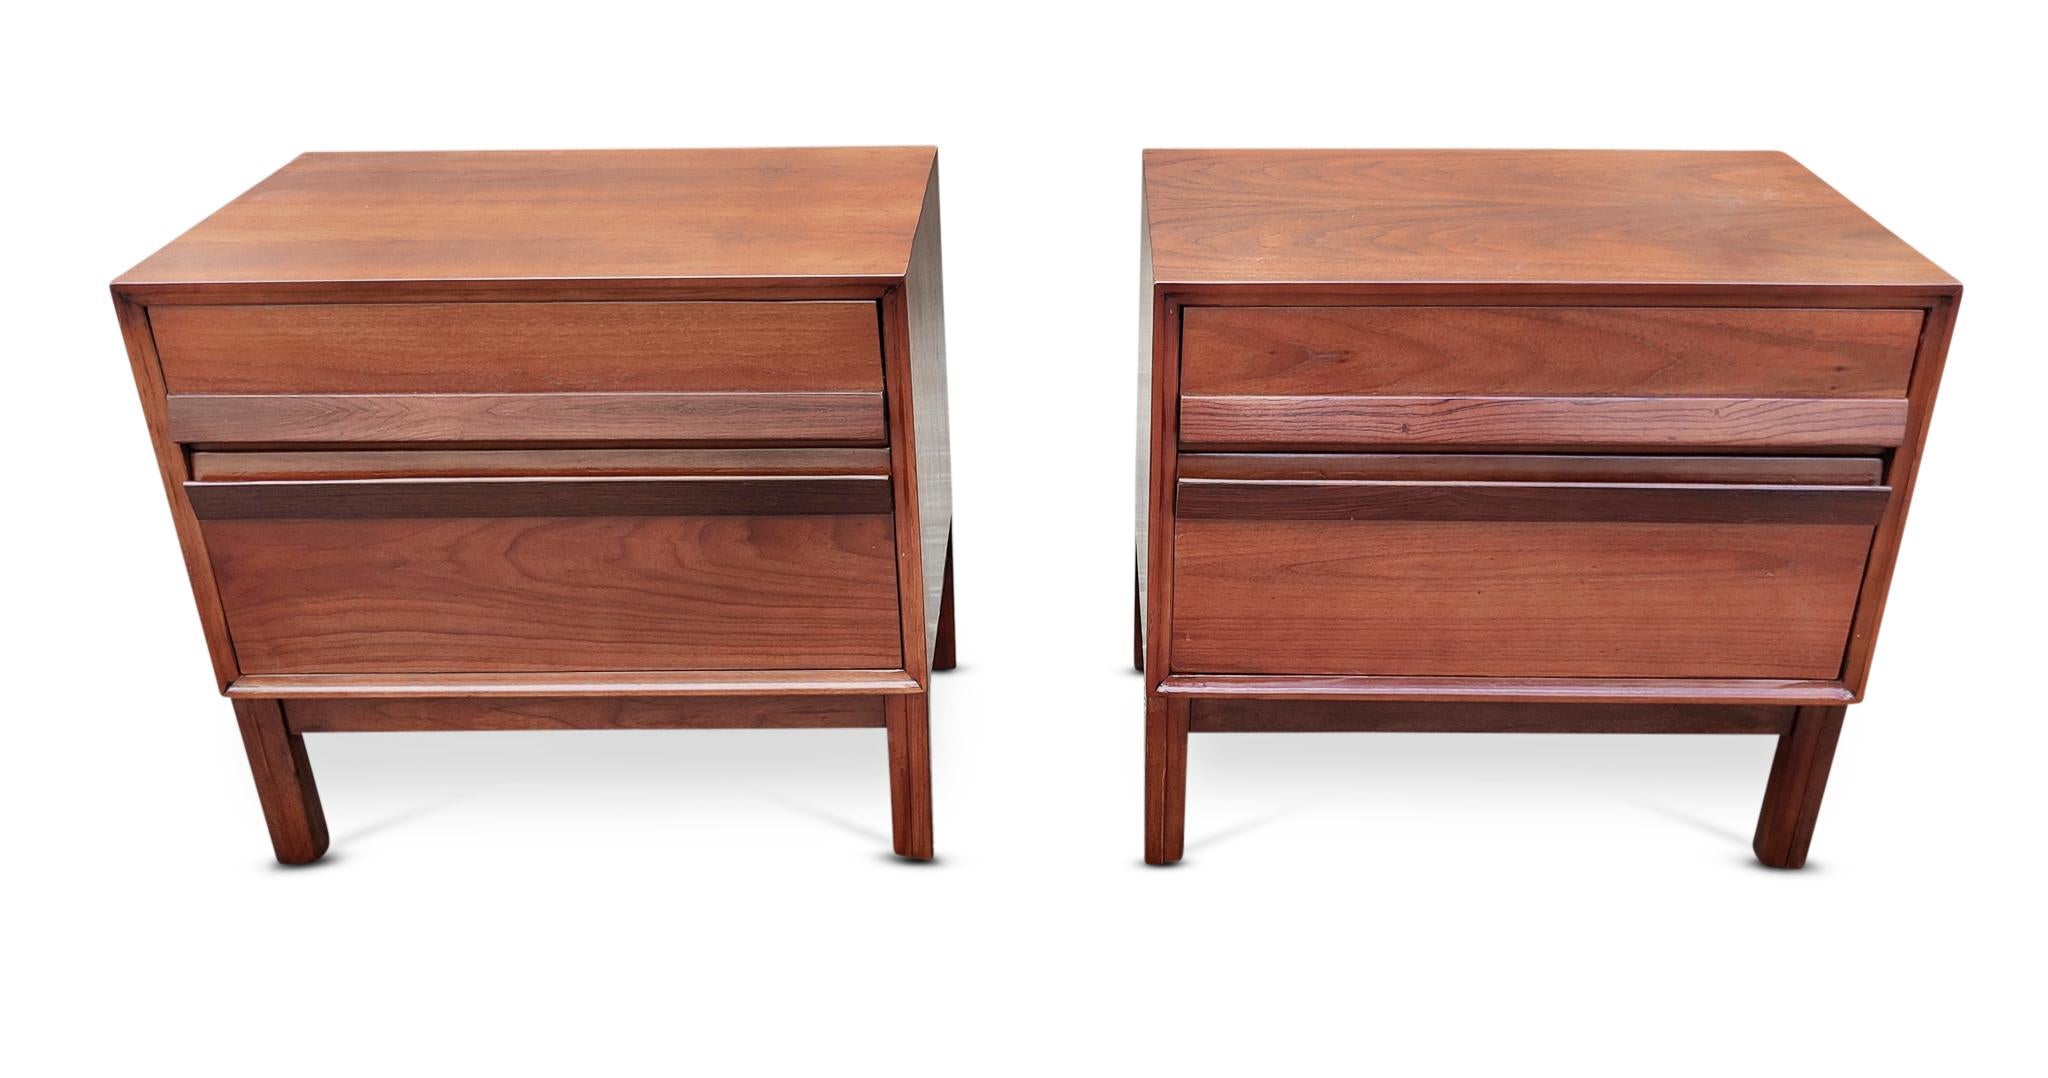 Pair of super elegant, professionally & fully restored, walnut cases & rosewood handles, 2-drawer nightstands or end-tables. All drawers work well and have clean interiors. This is a rarely seen model, and now they're in superb ready to go